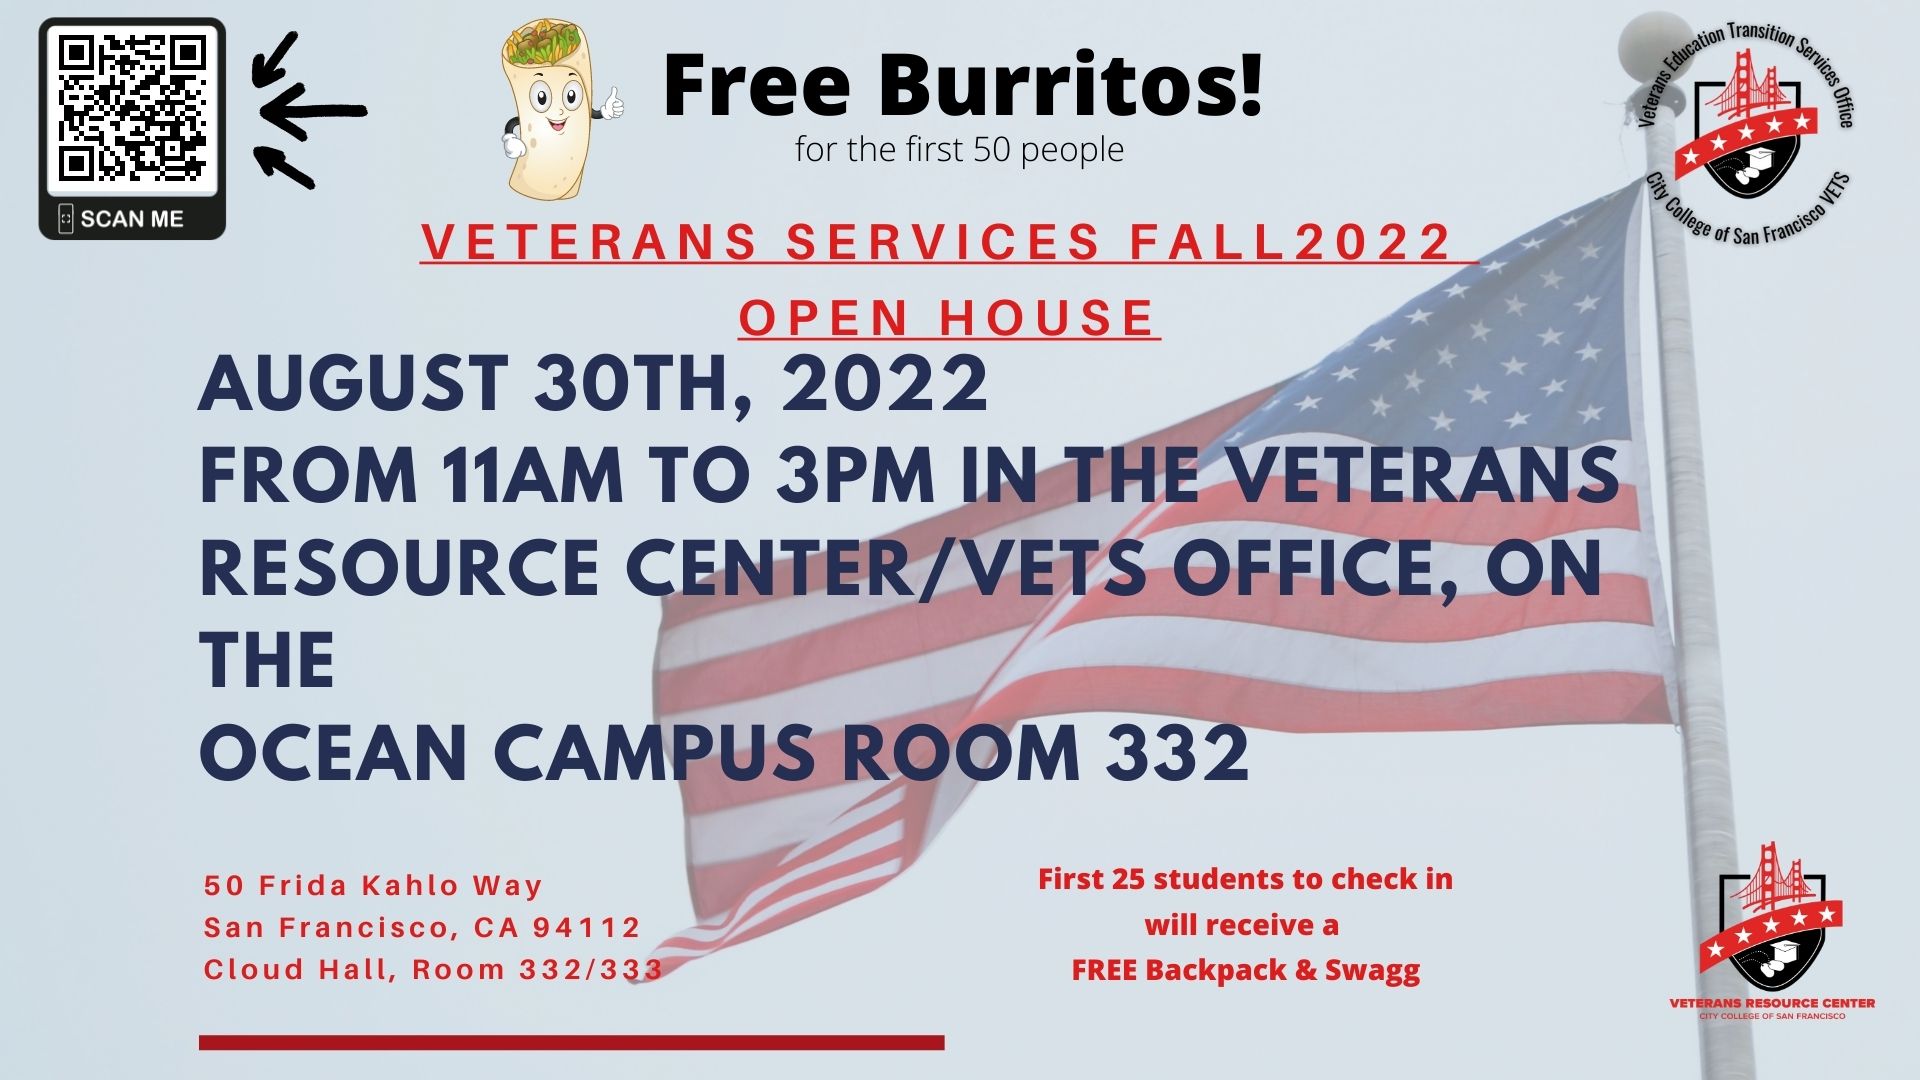 Veterans Services Fall 2022 Open House - August 30, 2022 from 11am to 3pm in the Veterans Resource Center, Ocean Campus, Room 332